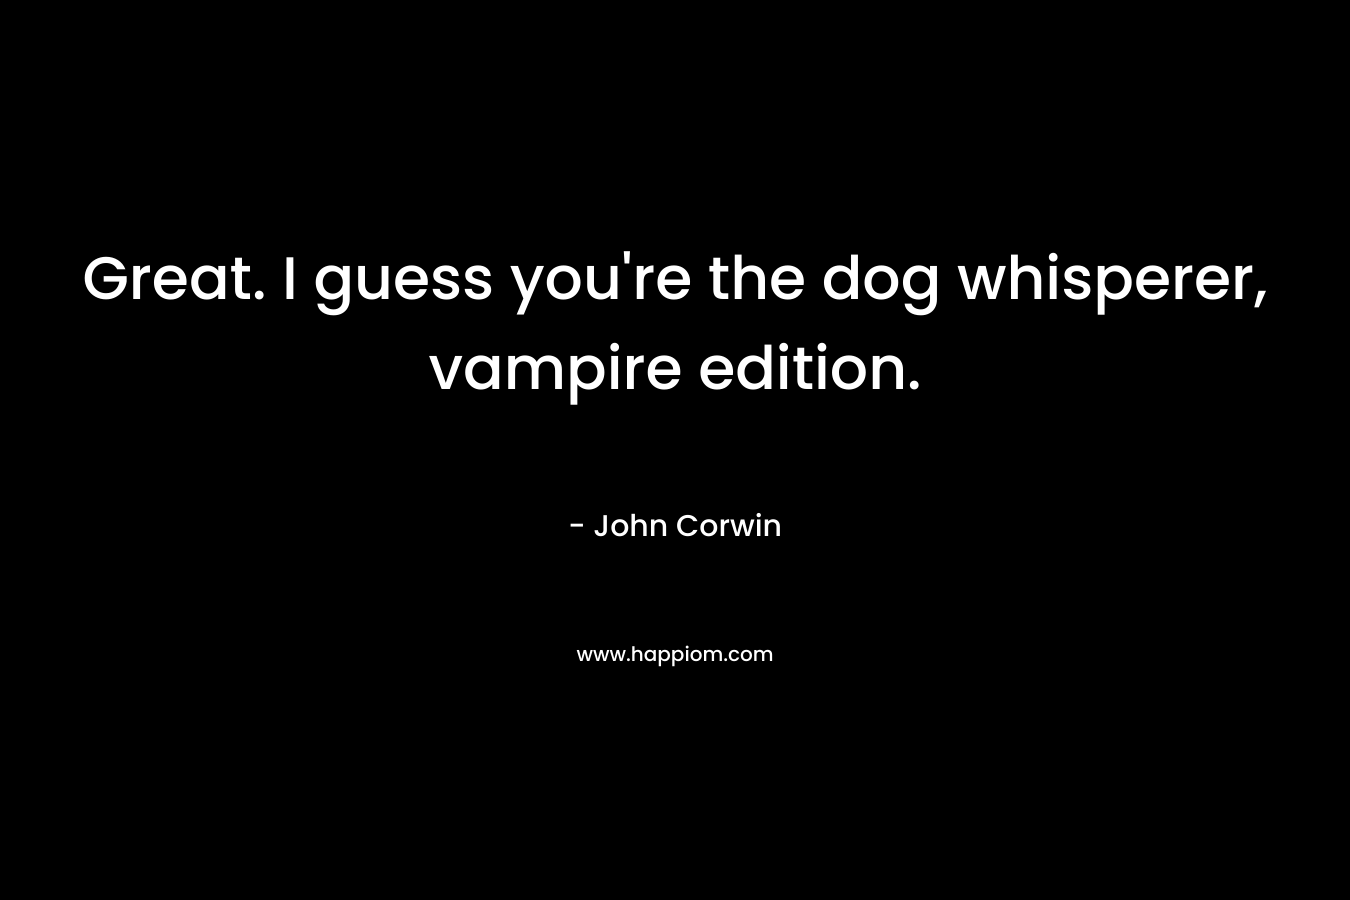 Great. I guess you’re the dog whisperer, vampire edition. – John Corwin